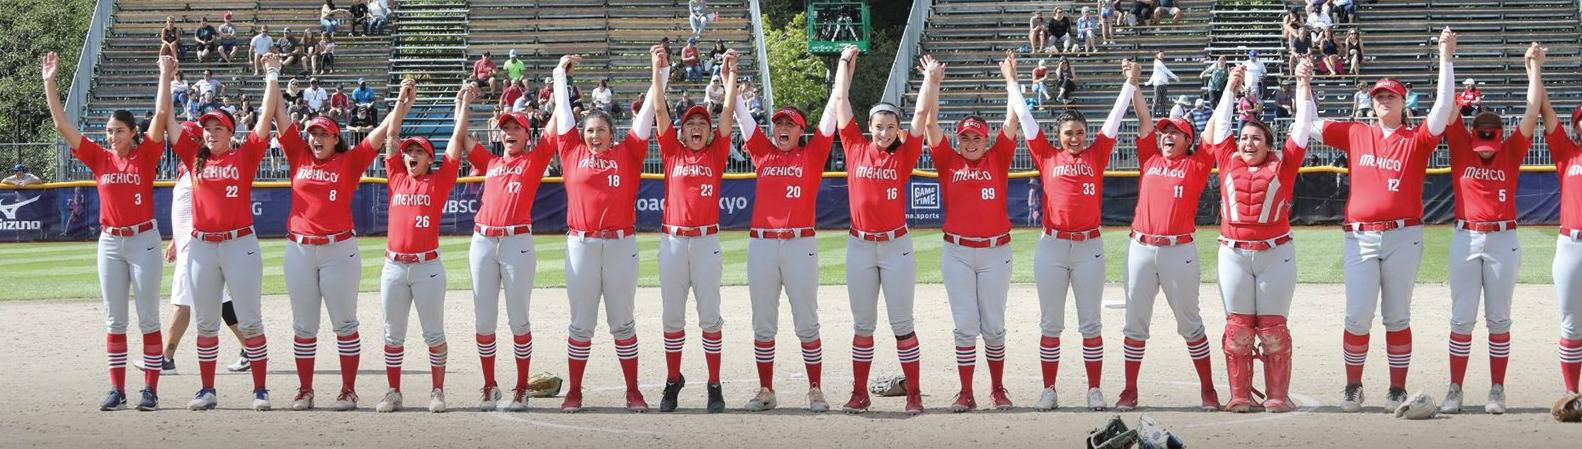 Redmond’s Tatyana Forbes, ninth from left, No. 16, is headed to the 2020 Summer Olympics in Tokyo with her team Mexico national softballers. Photo courtesy of WBSC.org